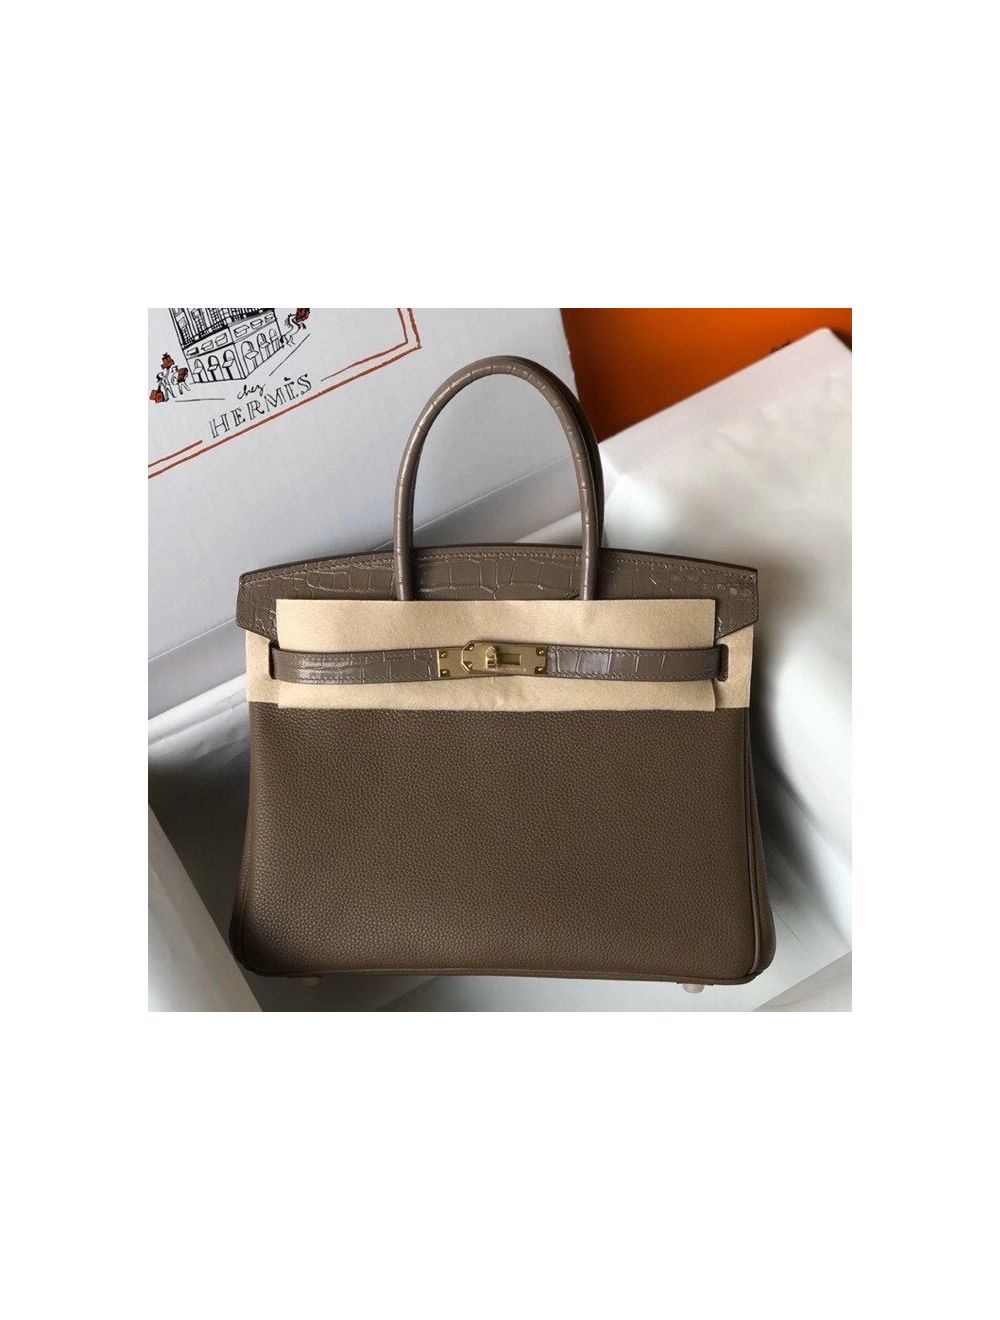 Replica Hermes Touch Birkin 30cm Limited Edition Taupe Bag